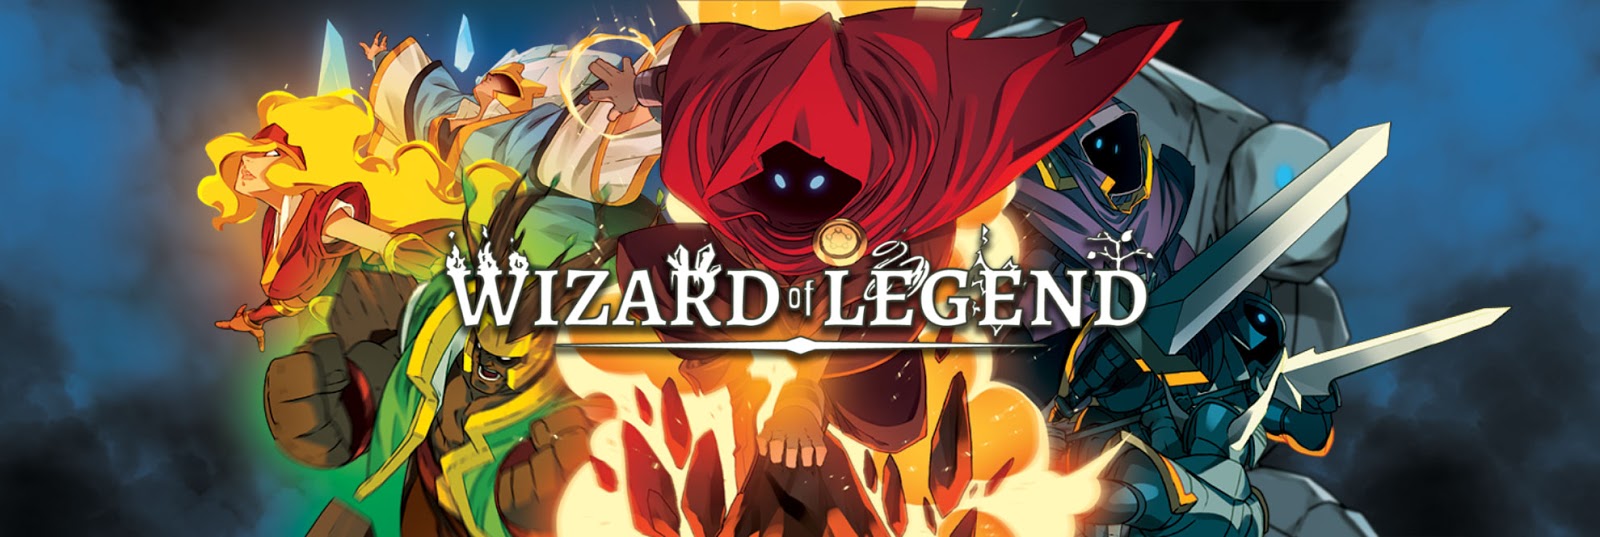 Wizard Of Legend Trainer +10 - FearLess Cheat Engine